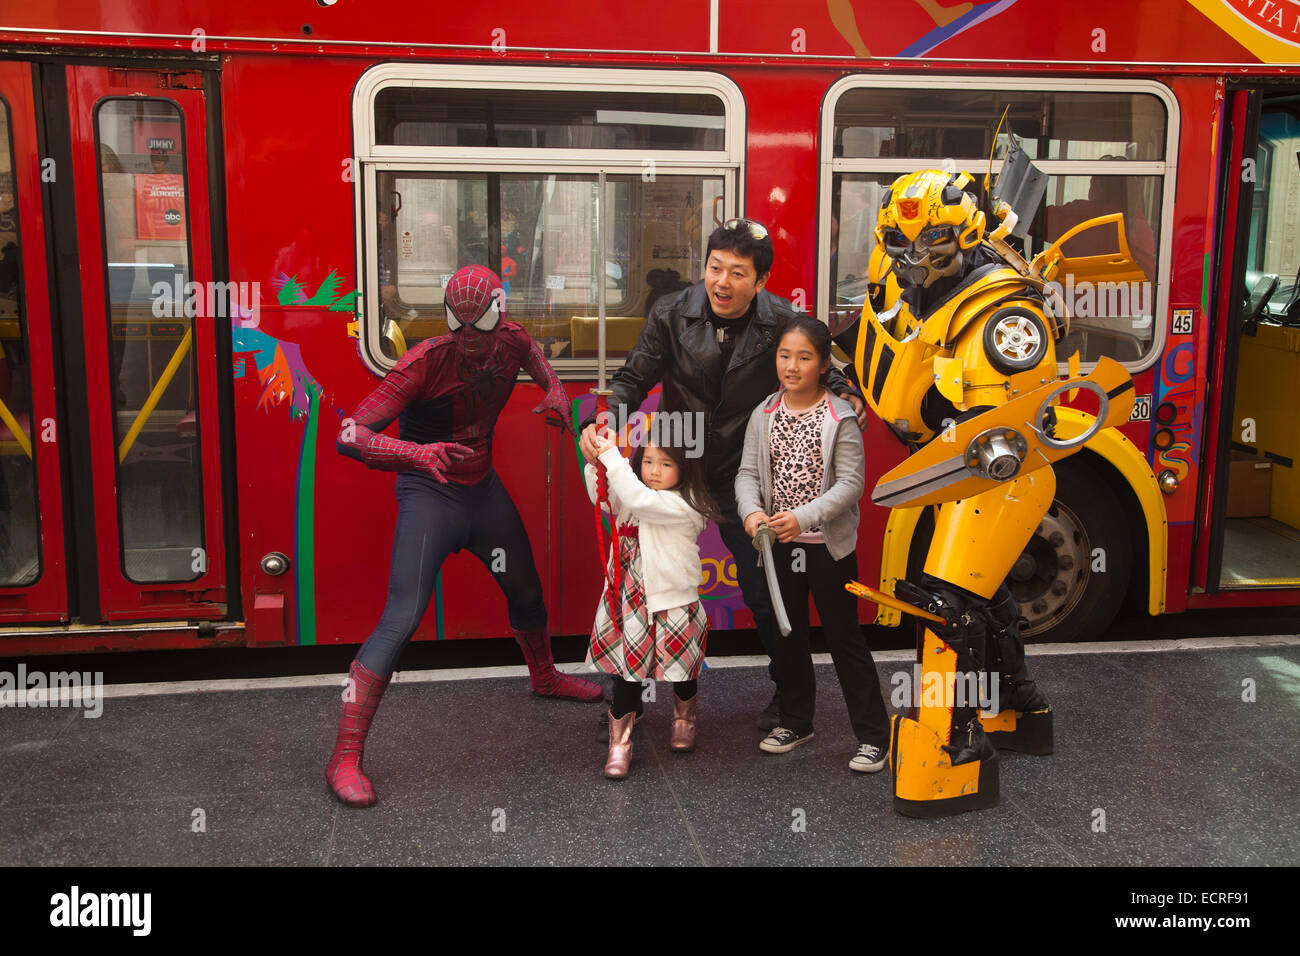 Superheroes on Hollywood Blvd., Los Angeles, California, United States of America Stock Photo